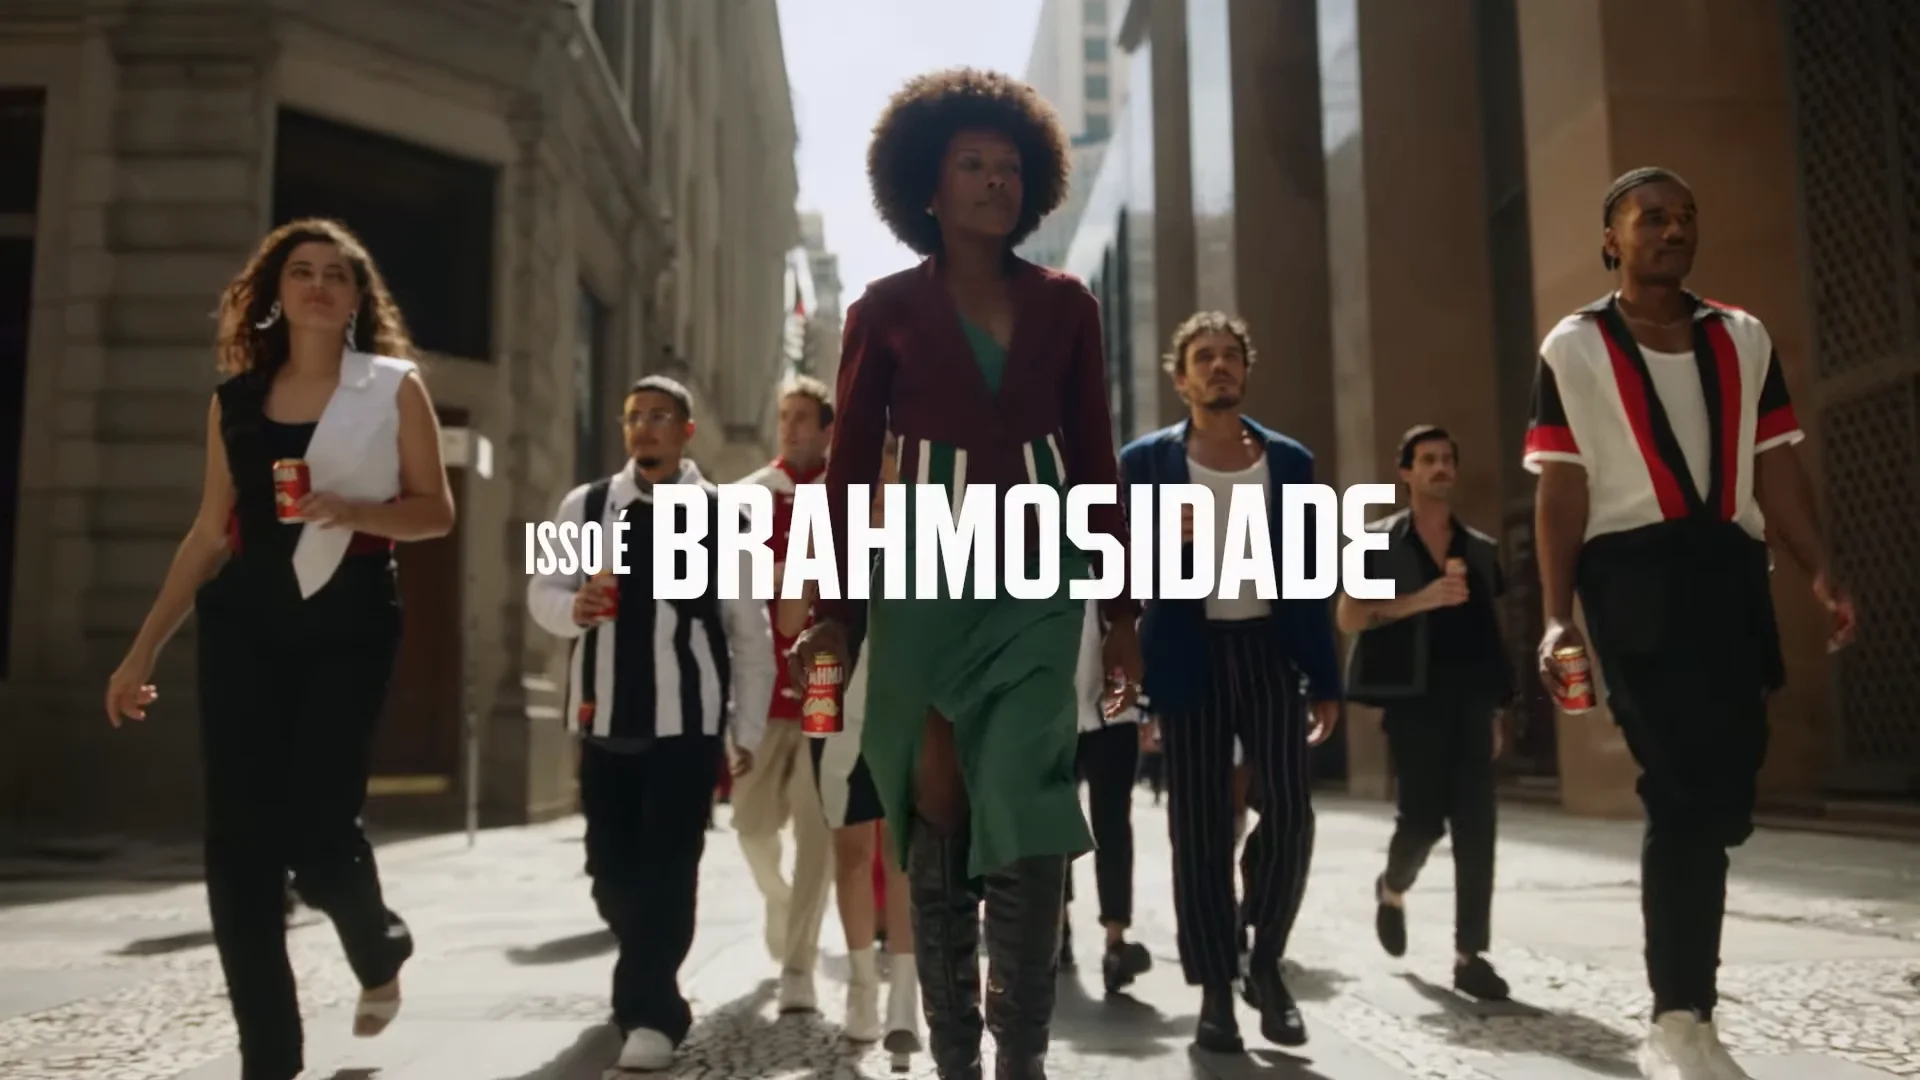 Diverse group of stylish people walking confidently in urban setting with text 'ISSO É BRAHOSIDADE' and holding cans of Brahma beer.